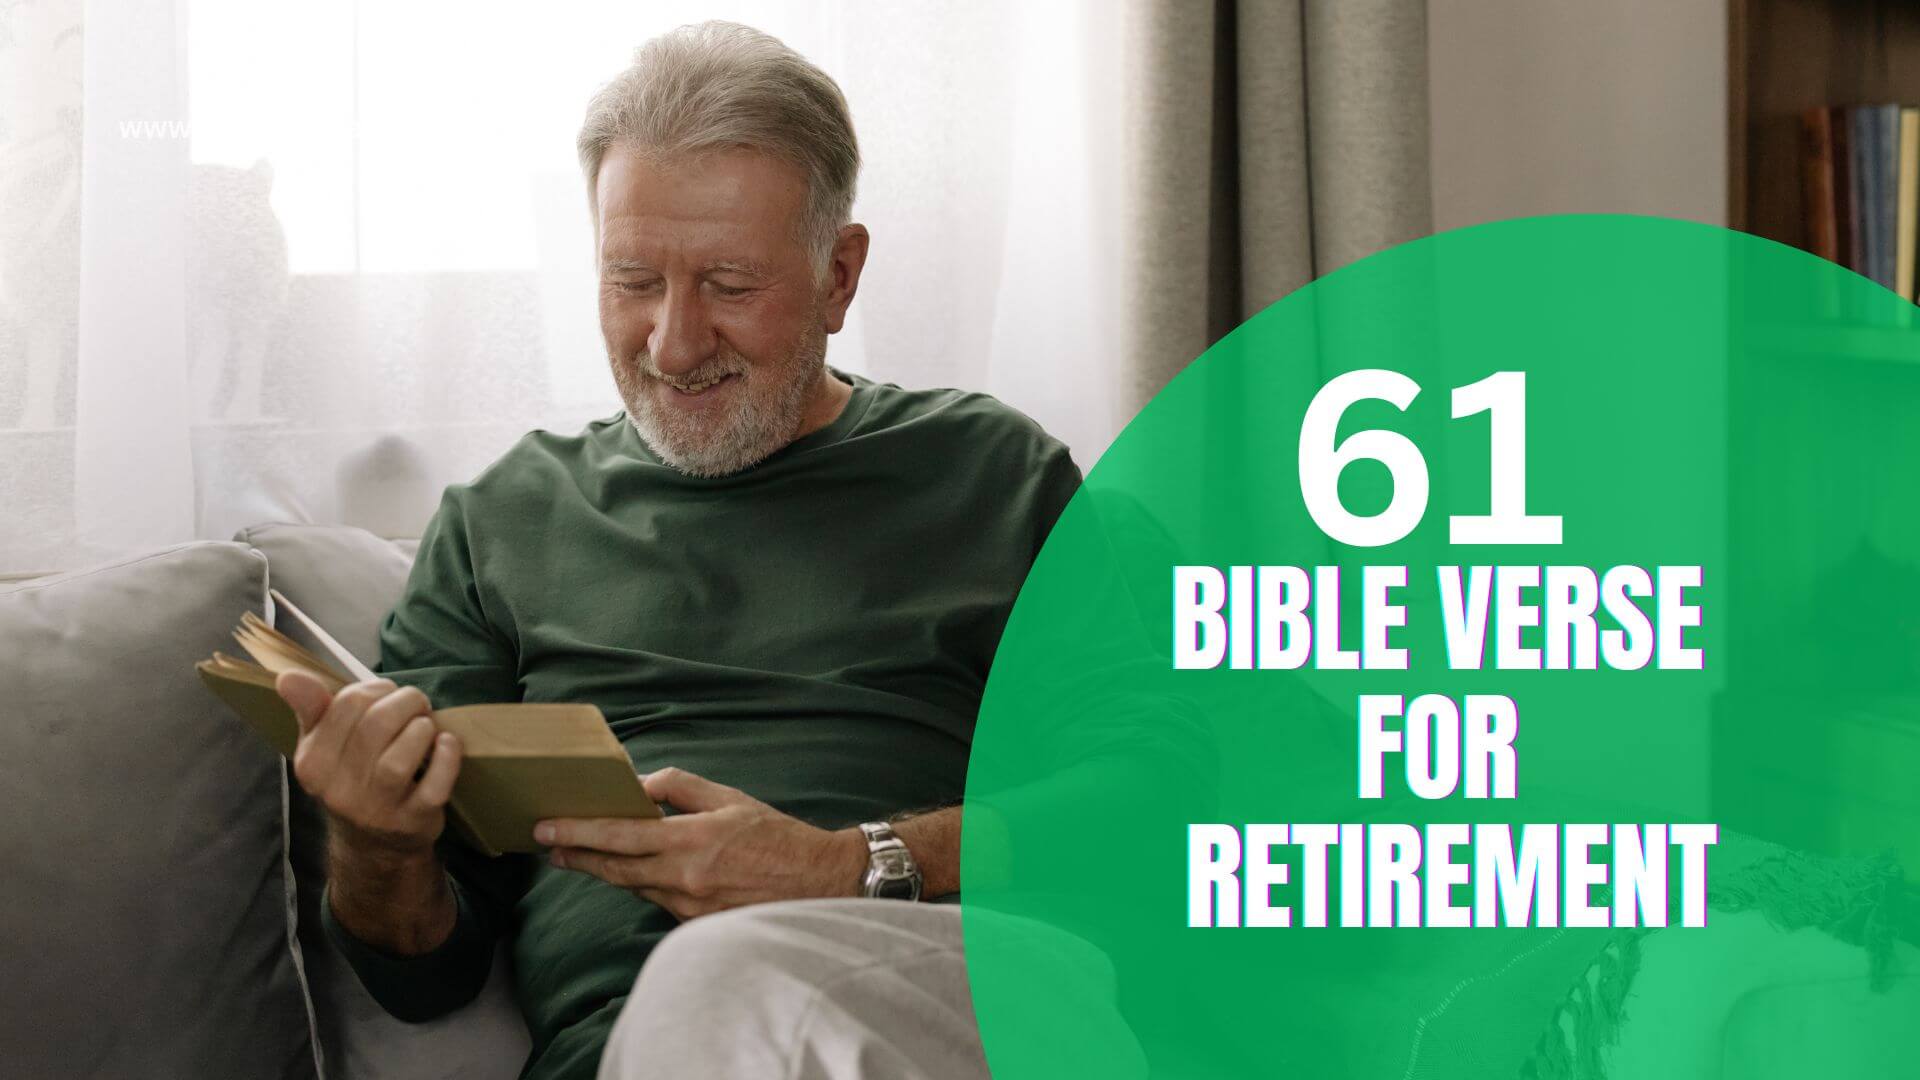 BIBLE VERSE FOR RETIREMENT (1)